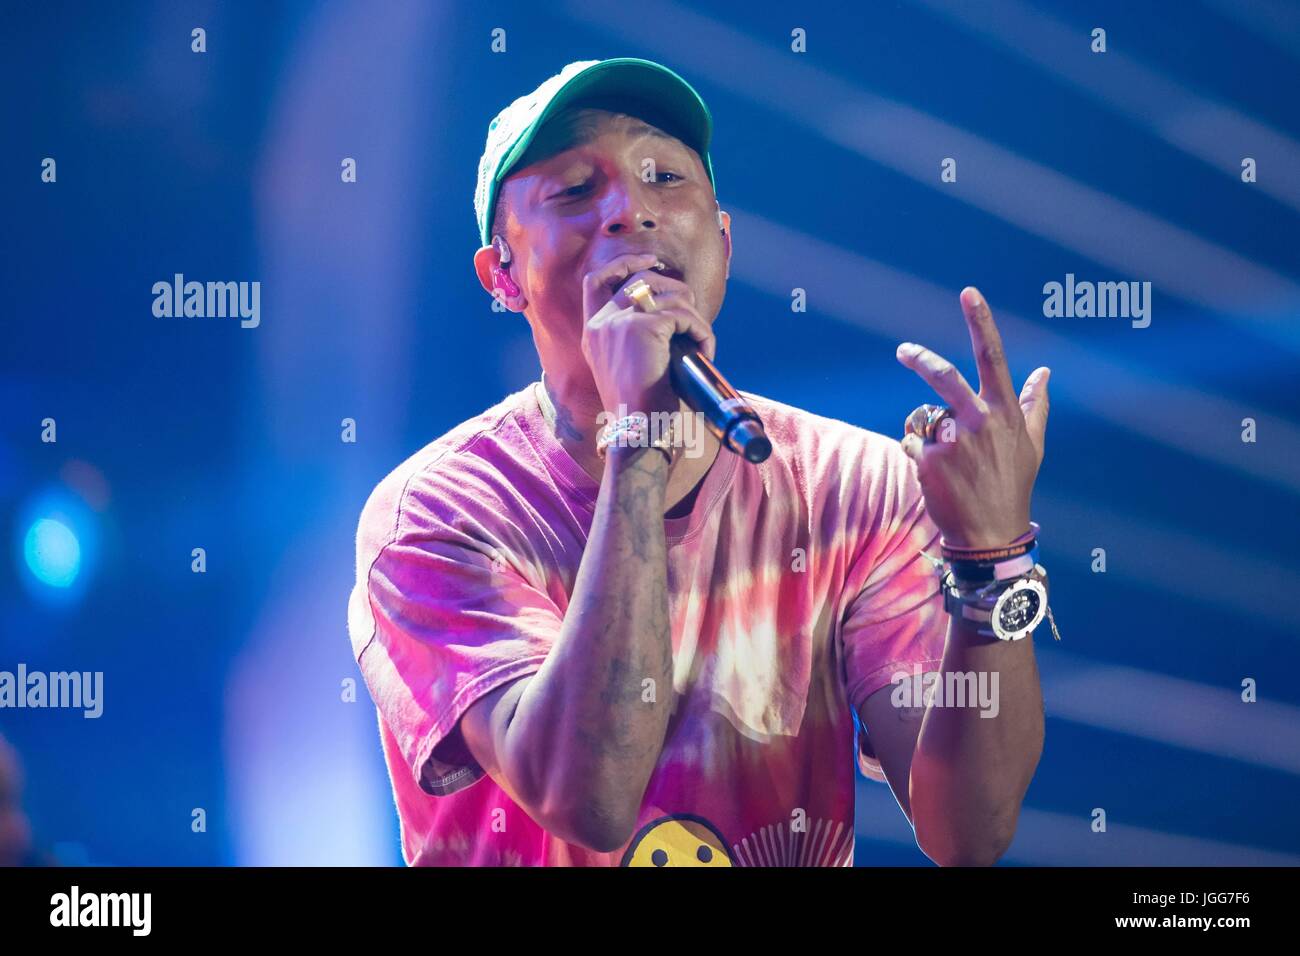 Hamburg, Germany. 6th July, 2017. Pharrell Williams performs at Global Citizen Festival 2017 at Barclaycard Arena in Hamburg, Germany. Credit: dpa picture alliance/Alamy Live News Stock Photo